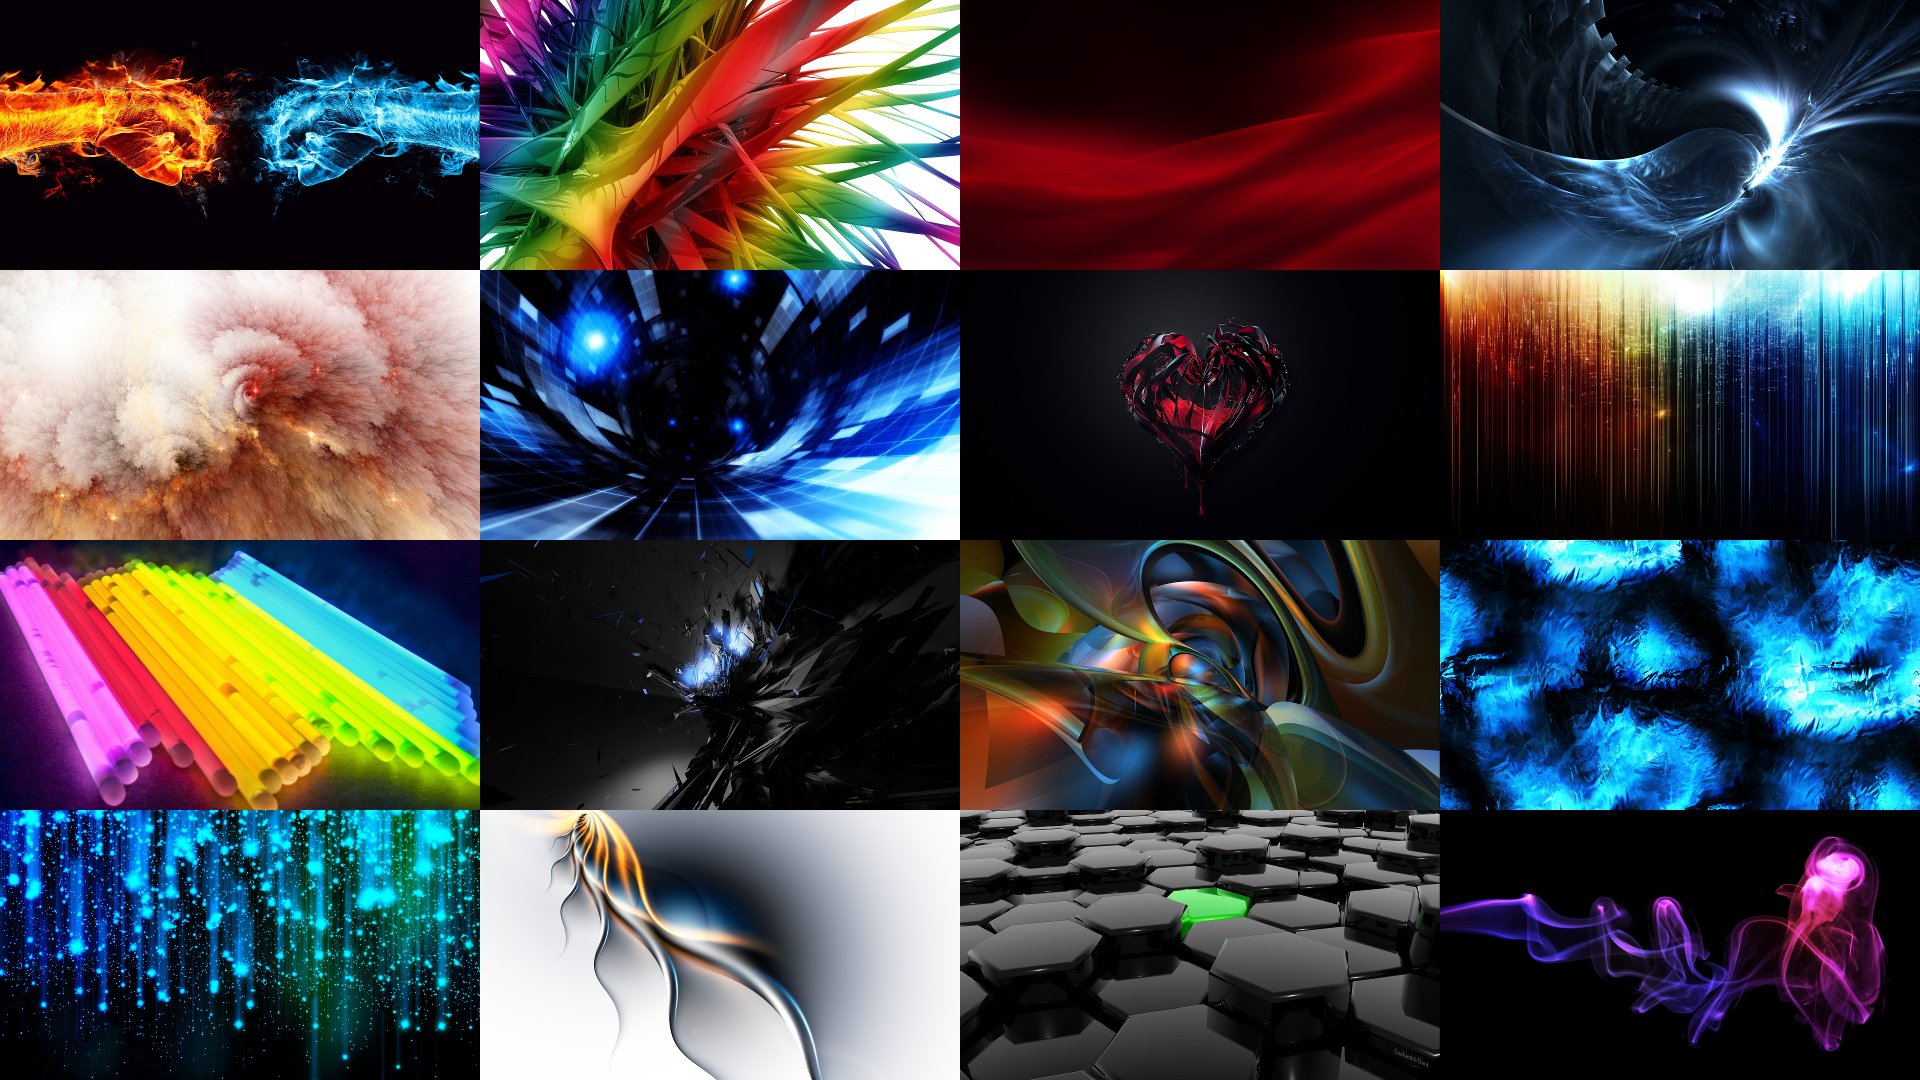 wallpapers abstractos,graphic design,fractal art,colorfulness,sky,art